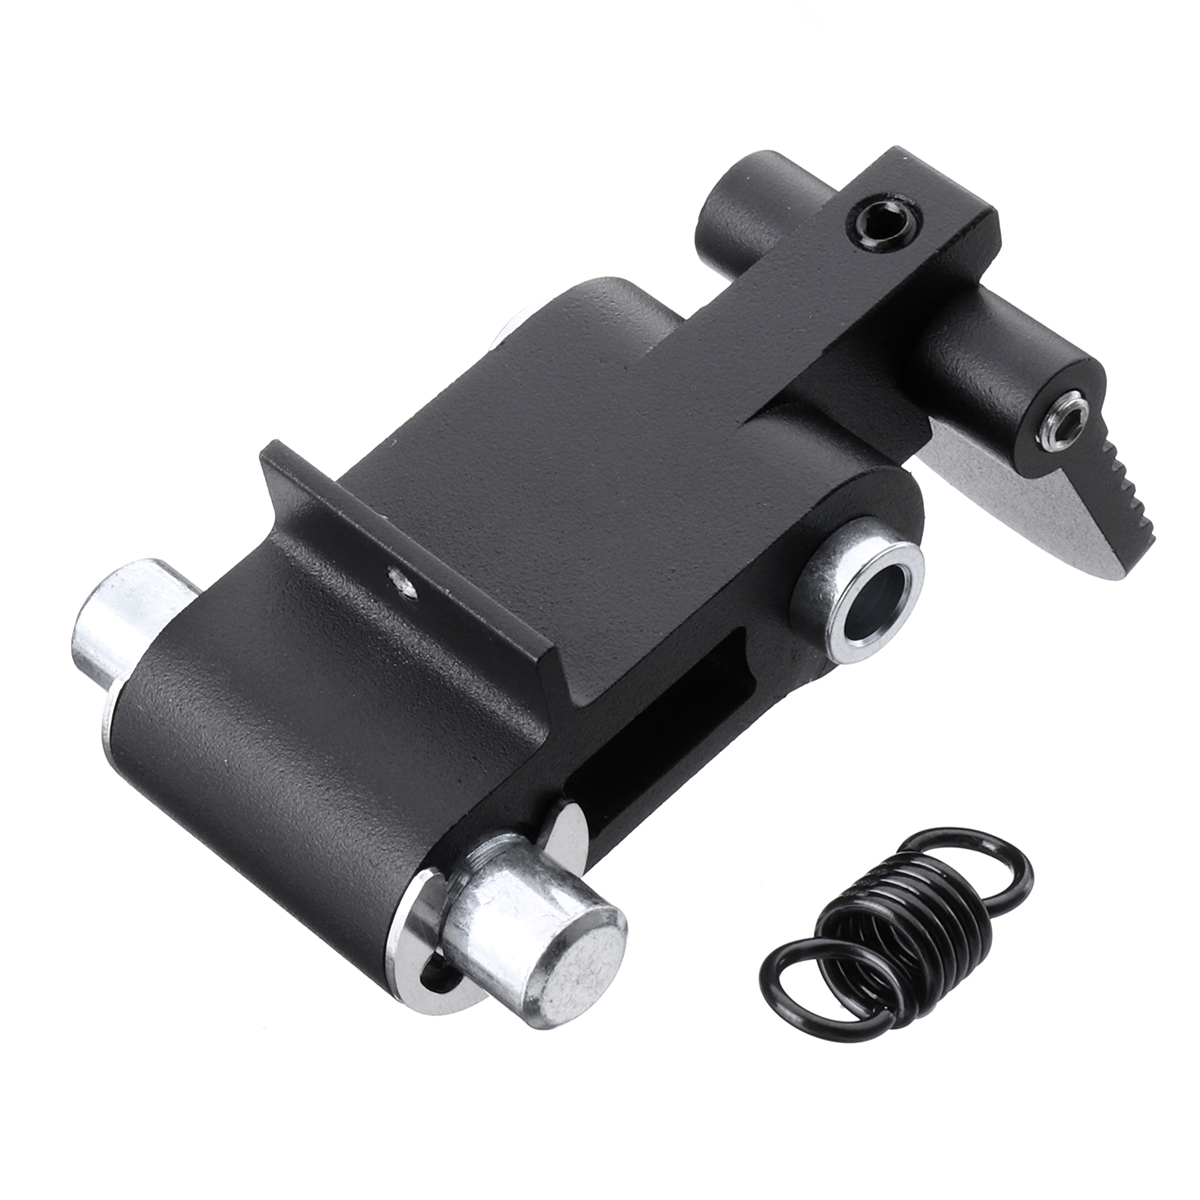 Black Folding Mechanism Repair Replacement for Ninebot Nine ES2 Scooter - Auto GoShop